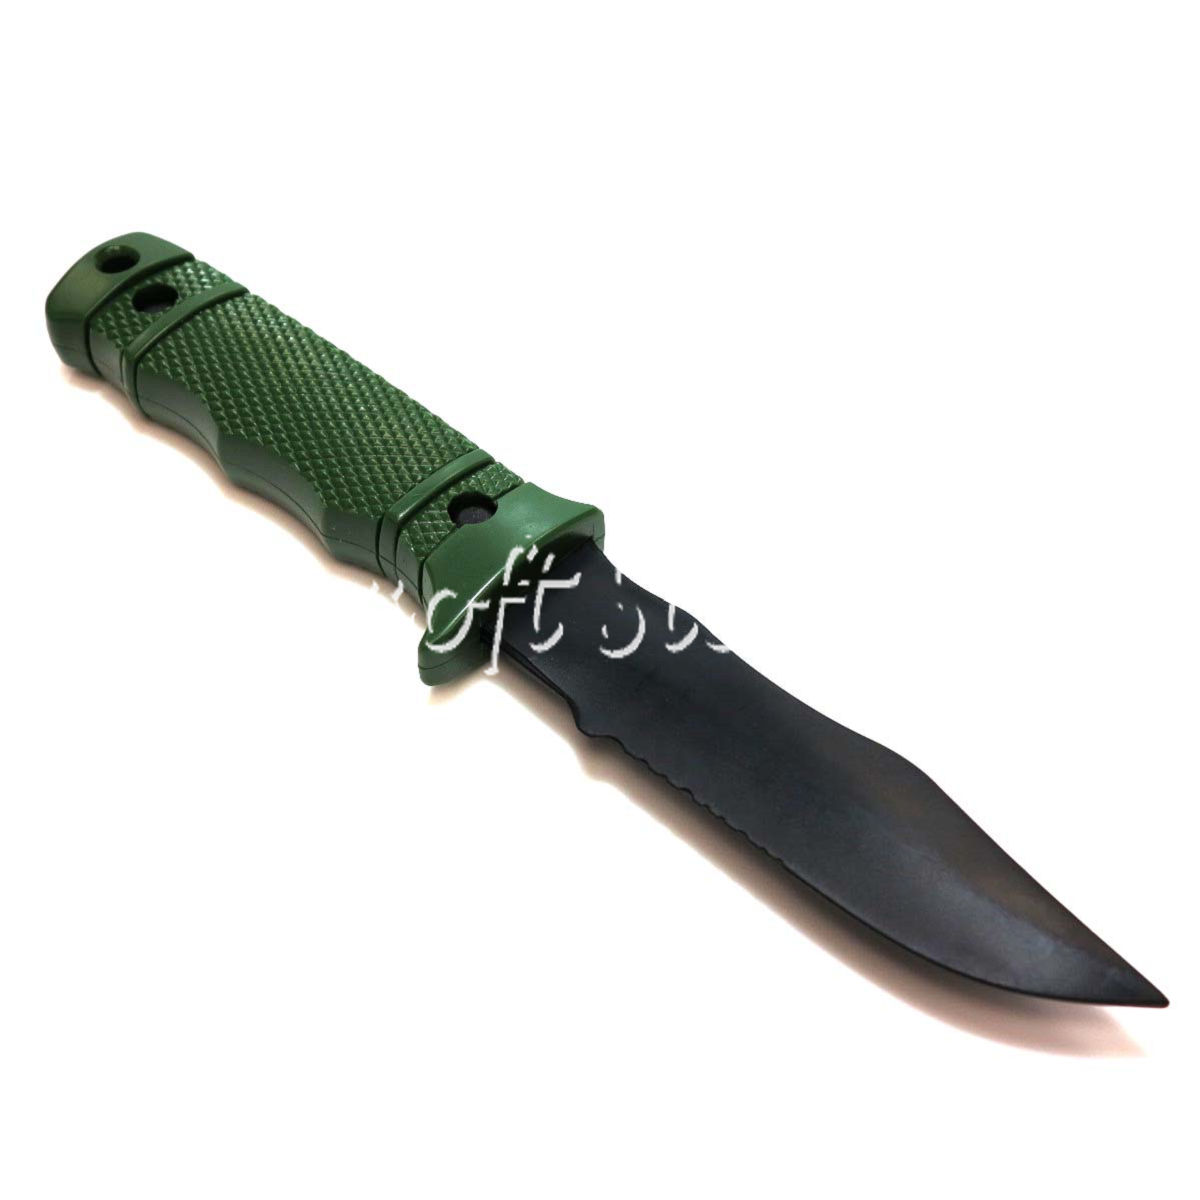 Airsoft Wargame CYMA Dummy Plastic M37 Seal Pup Knife with Sheath Olive Drab OD (HY-016)